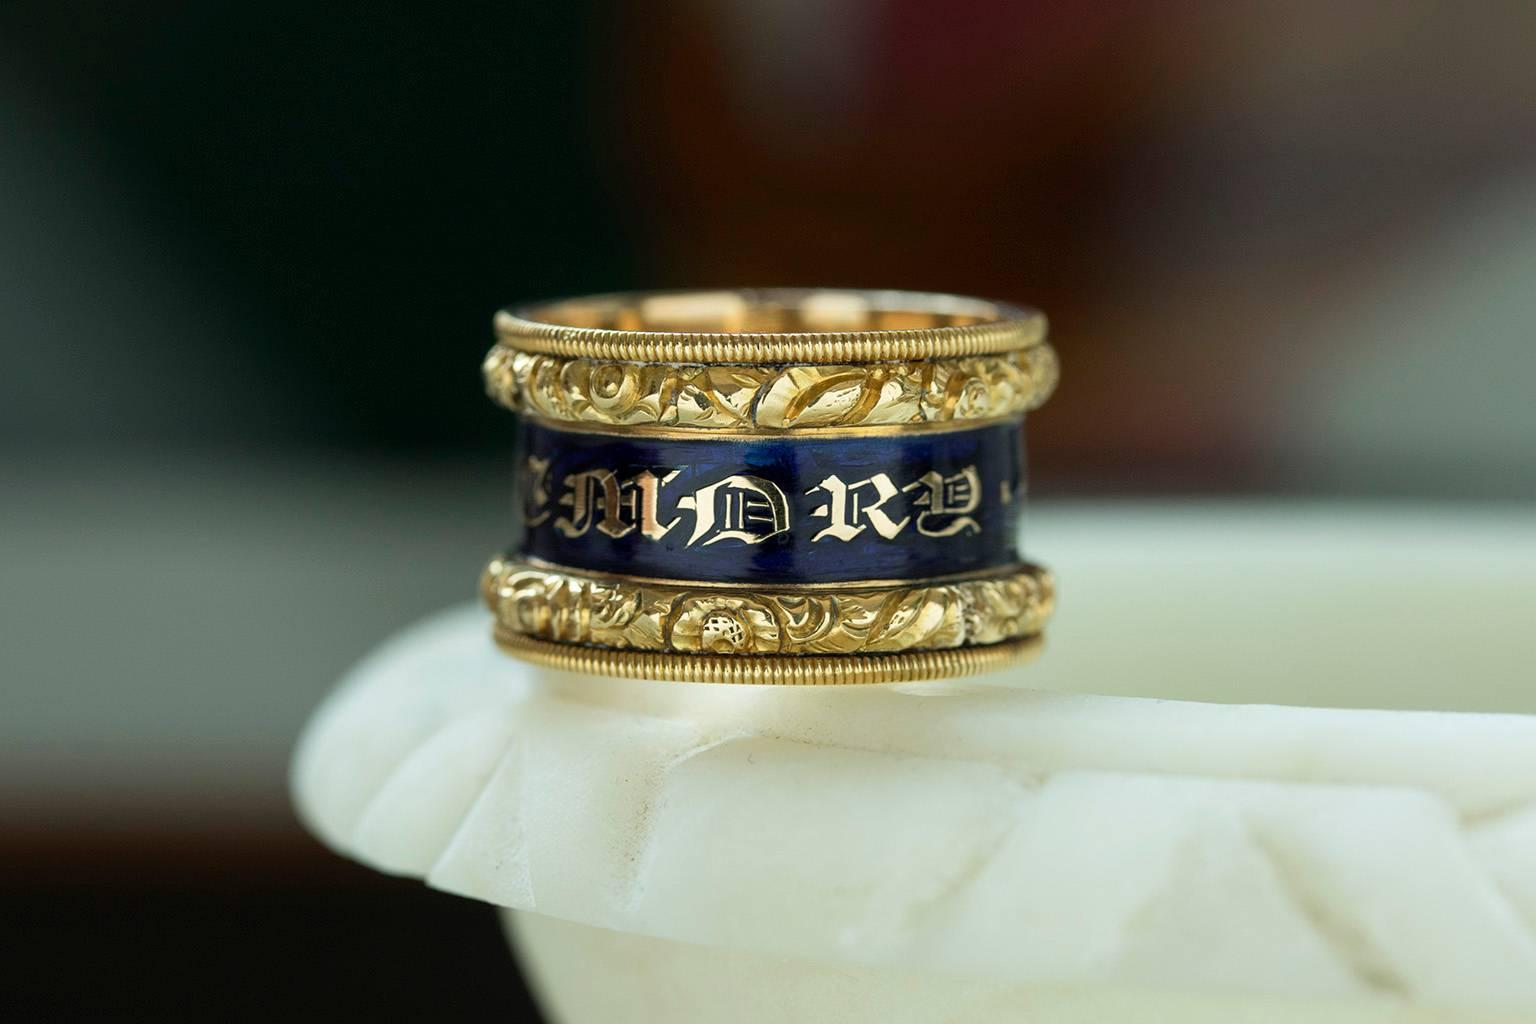 C.1821. A wide Georgian blue enamel memorial ring. The gothic script reads 'In Memory Of' through the band. The top and bottom edges are beautifully carved, and the engraving inside shows 'Ann Page Ob. 6 aug 1821 Aet 74